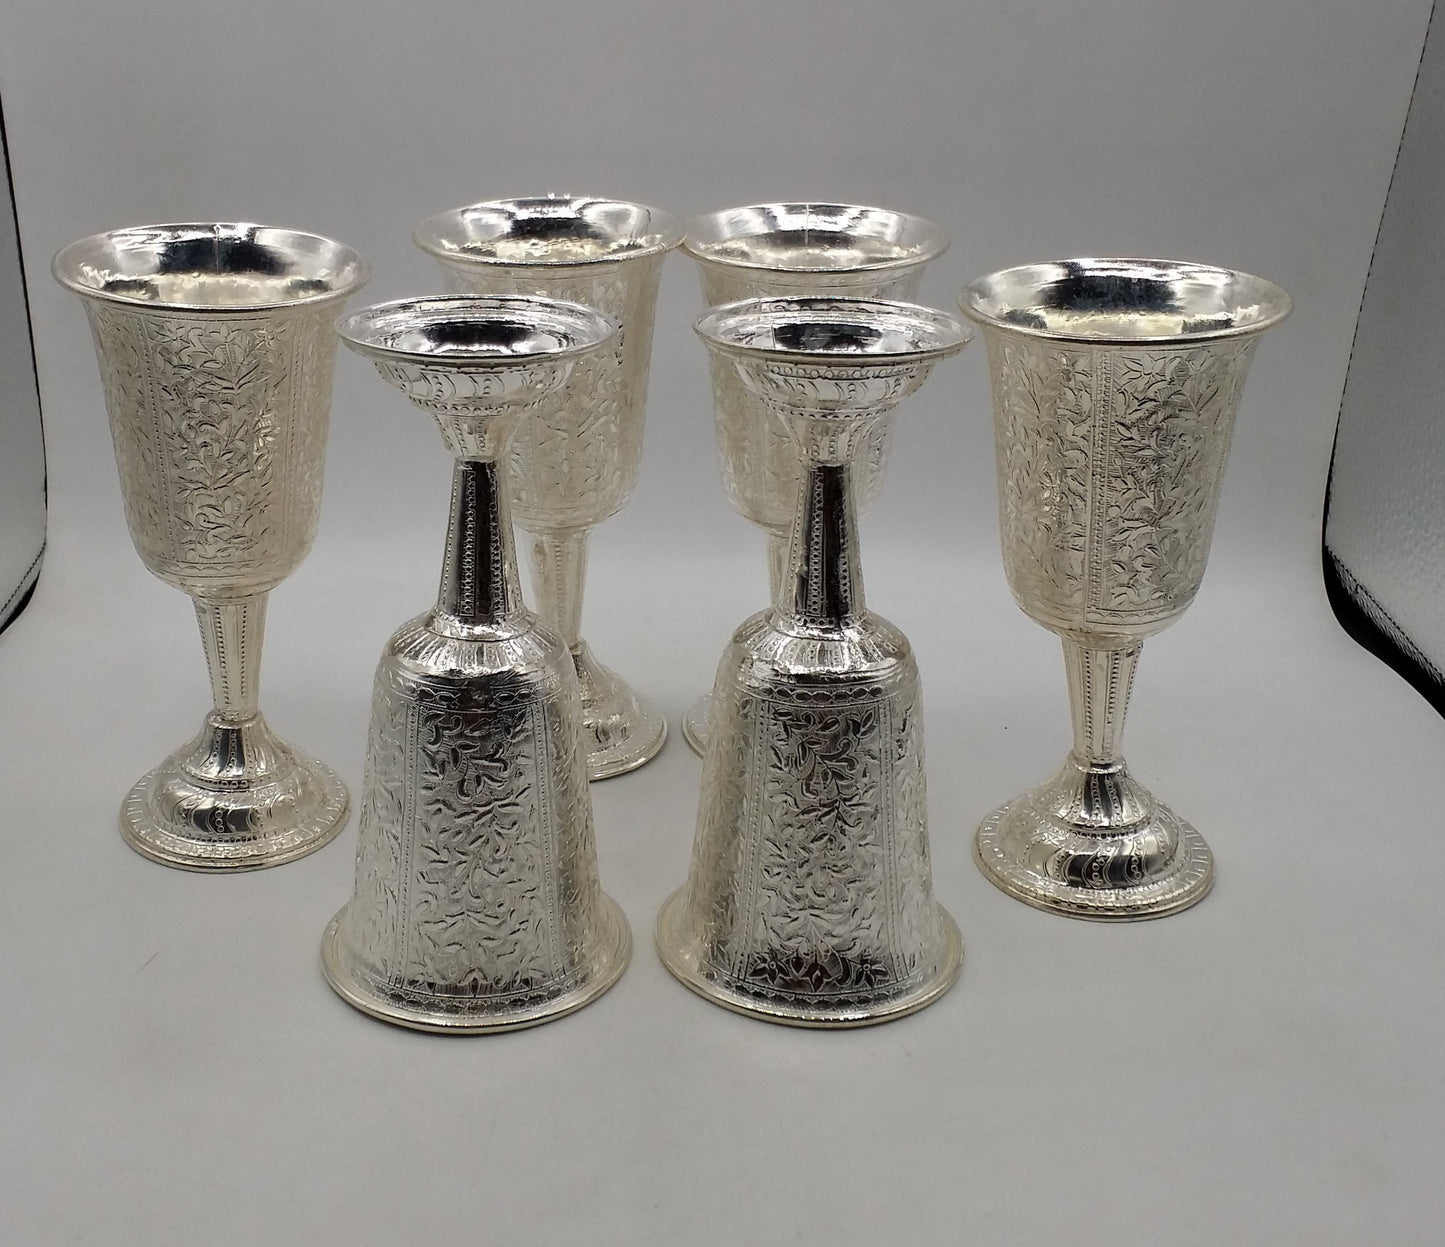 925 sterling silver handmade engraved floral design set of 6 wine glass, best gifting glasses, silver utensils, silver articles water glass - TRIBAL ORNAMENTS